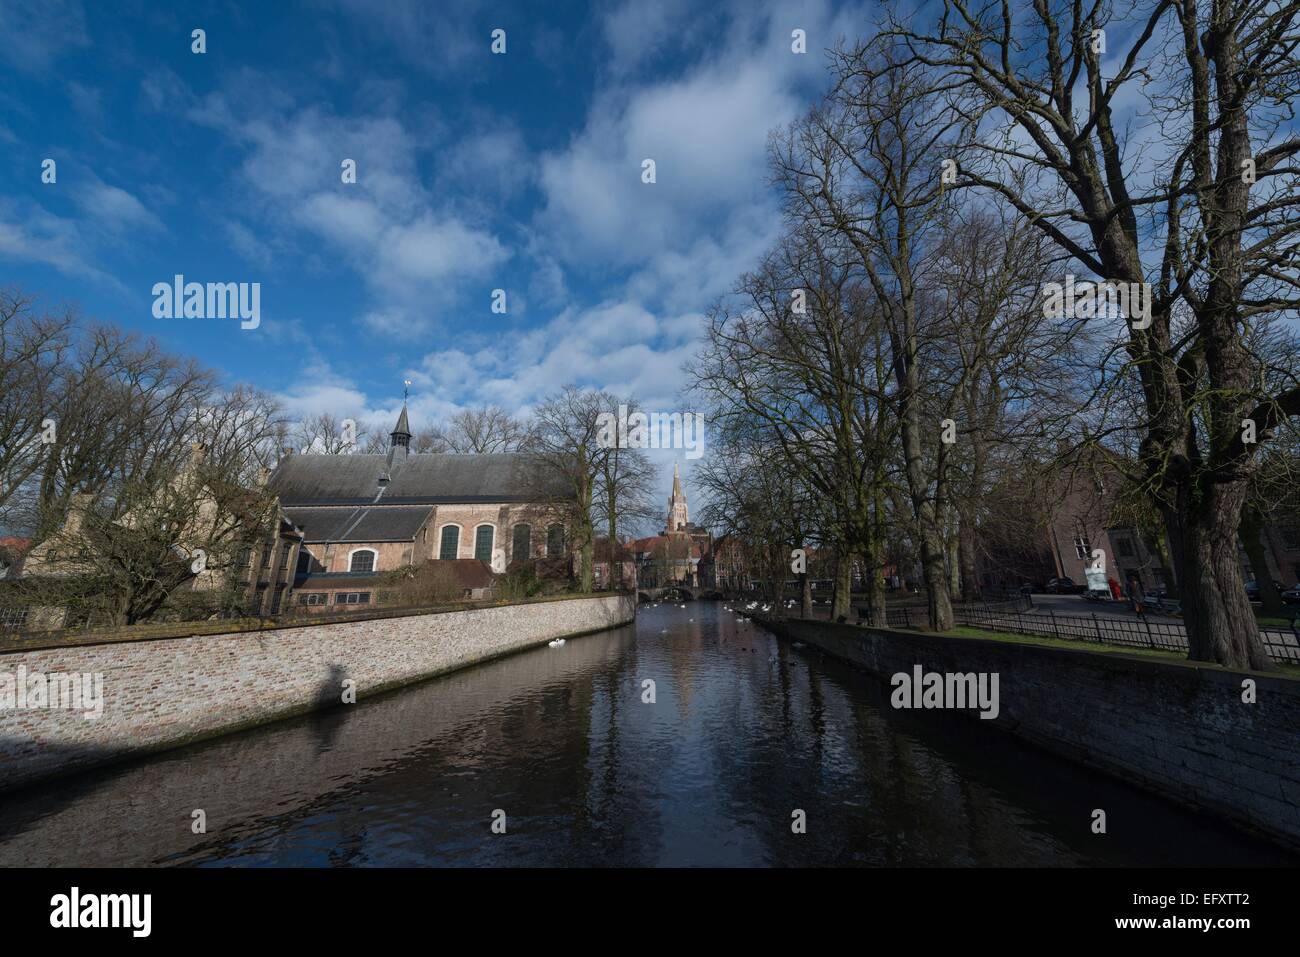 arwv aroomwithviews, bridge, bruges, brugge, canal, canals, church, cold, freezing, frost, frozen, historic, history, holidays, Stock Photo